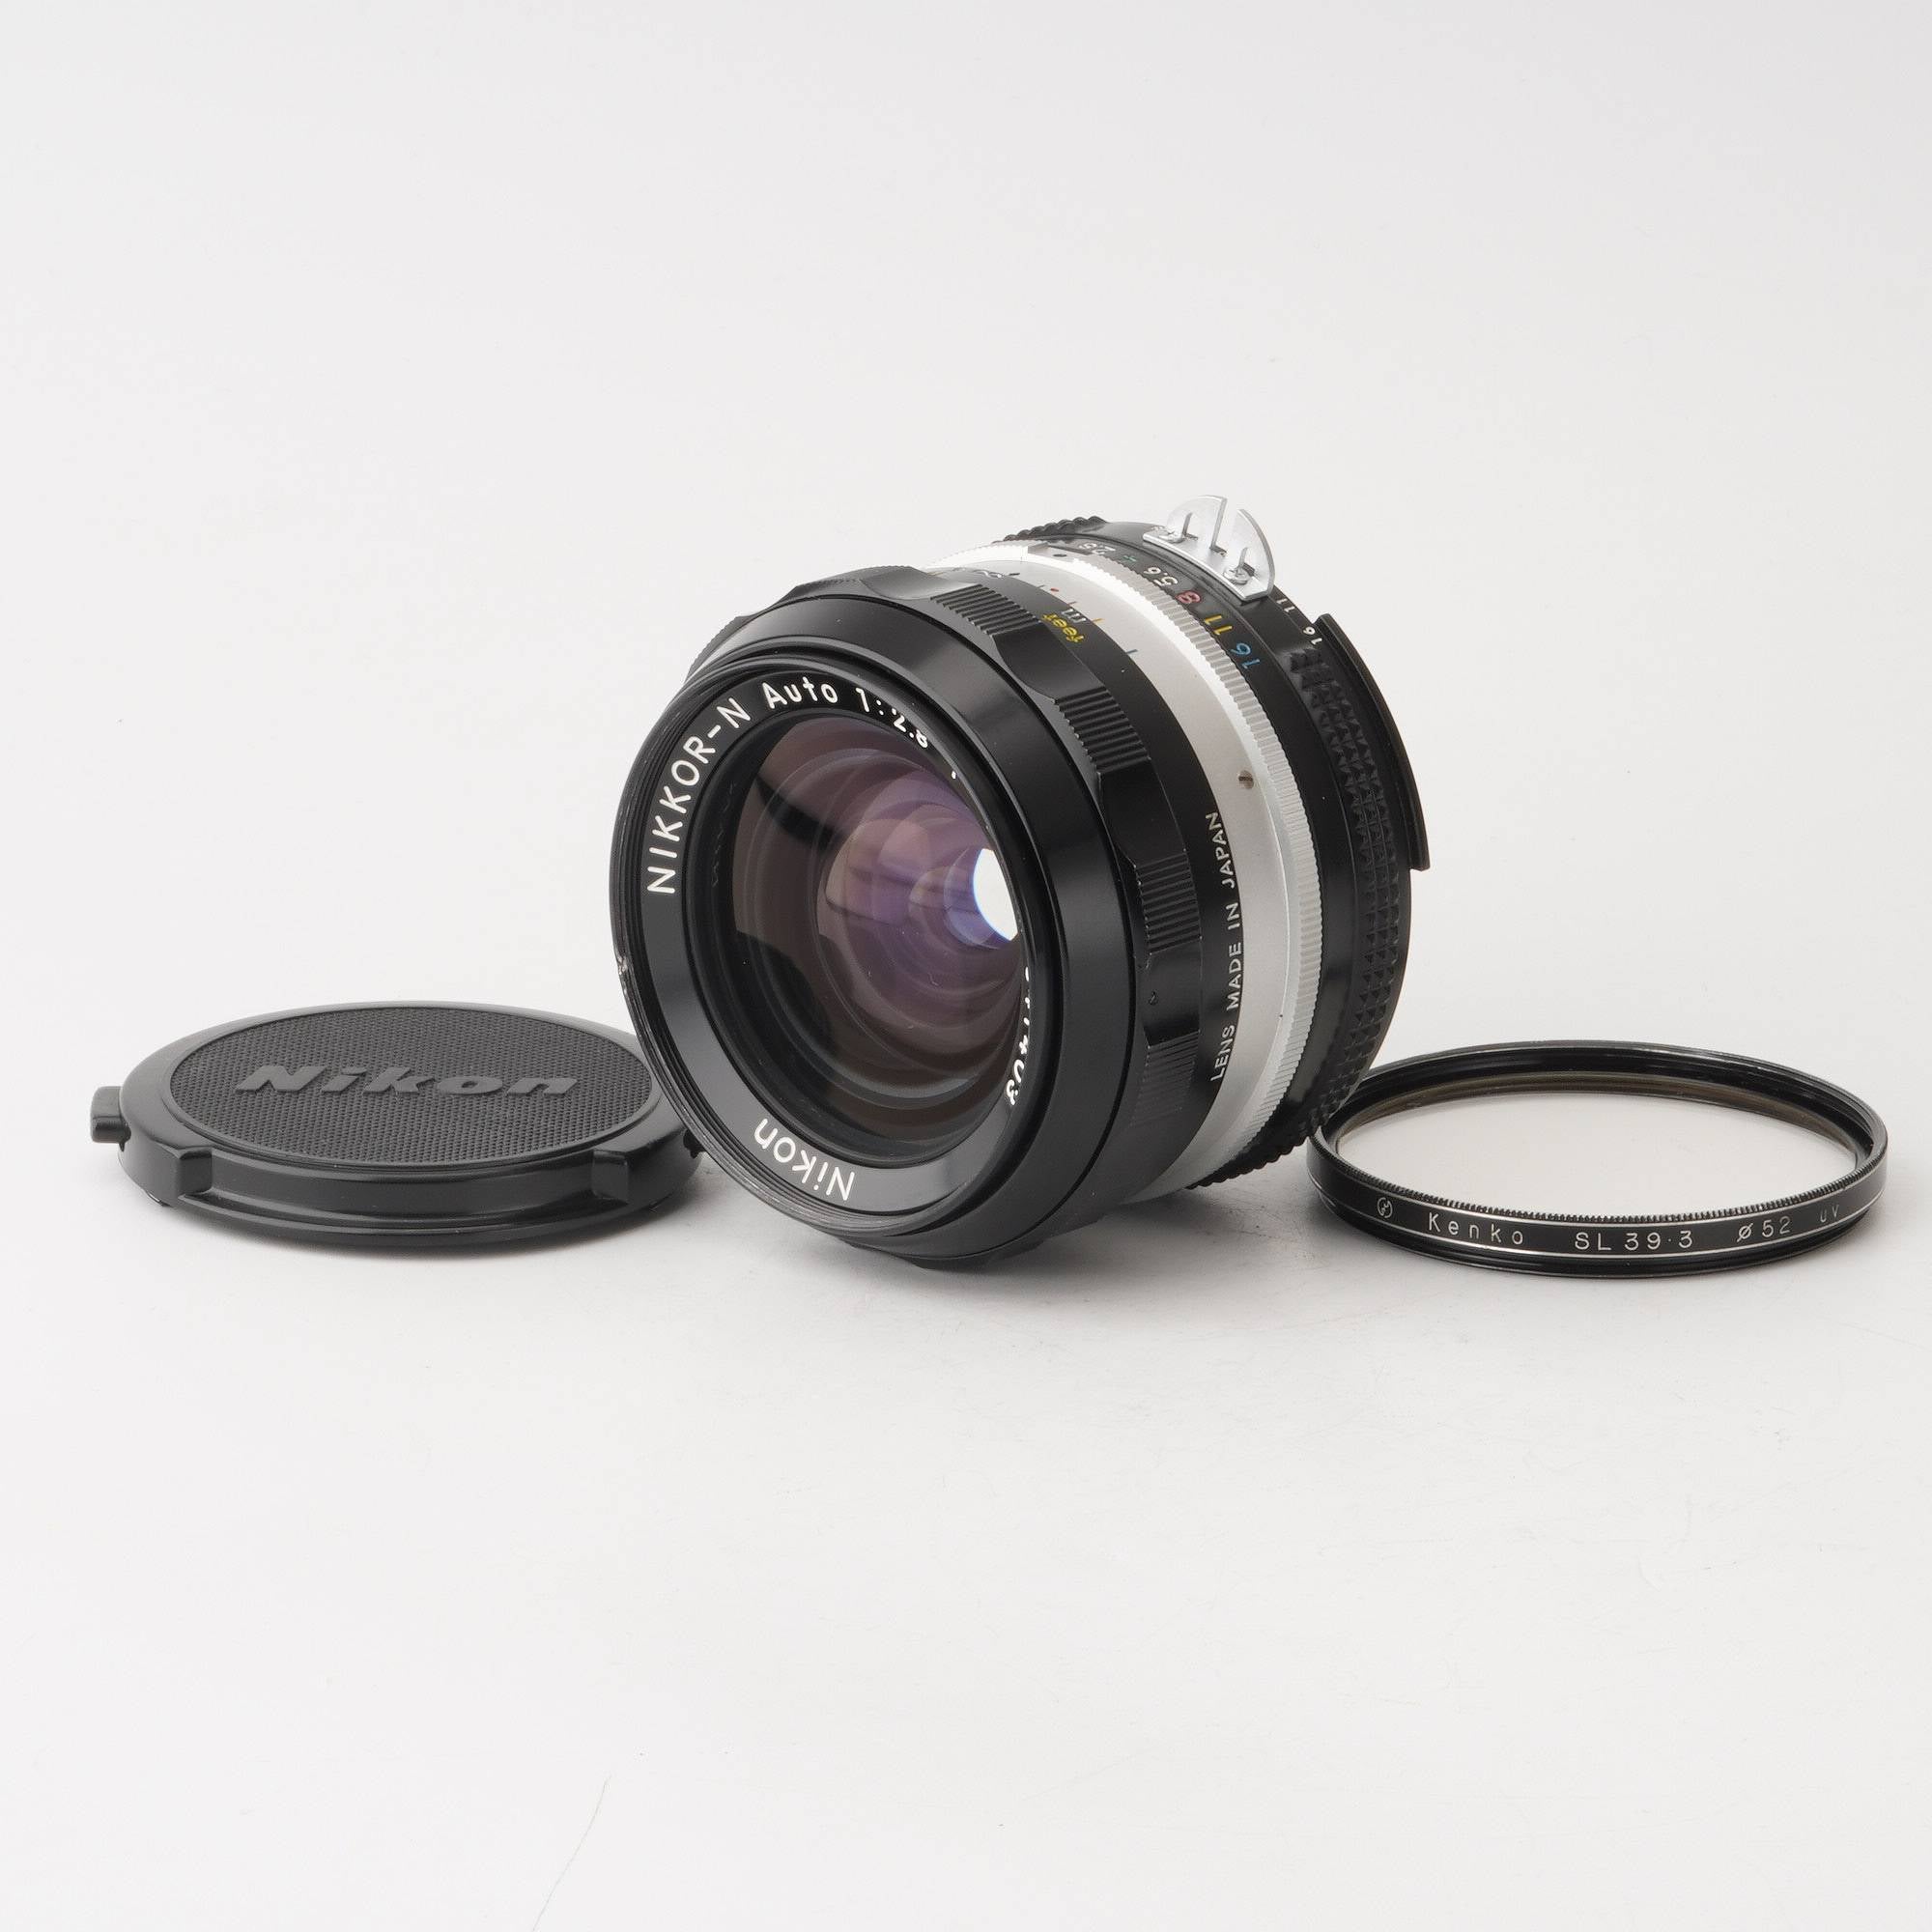 Nikon ニコン NIKKOR-N Auto 24mm f/2.8 Ai改-